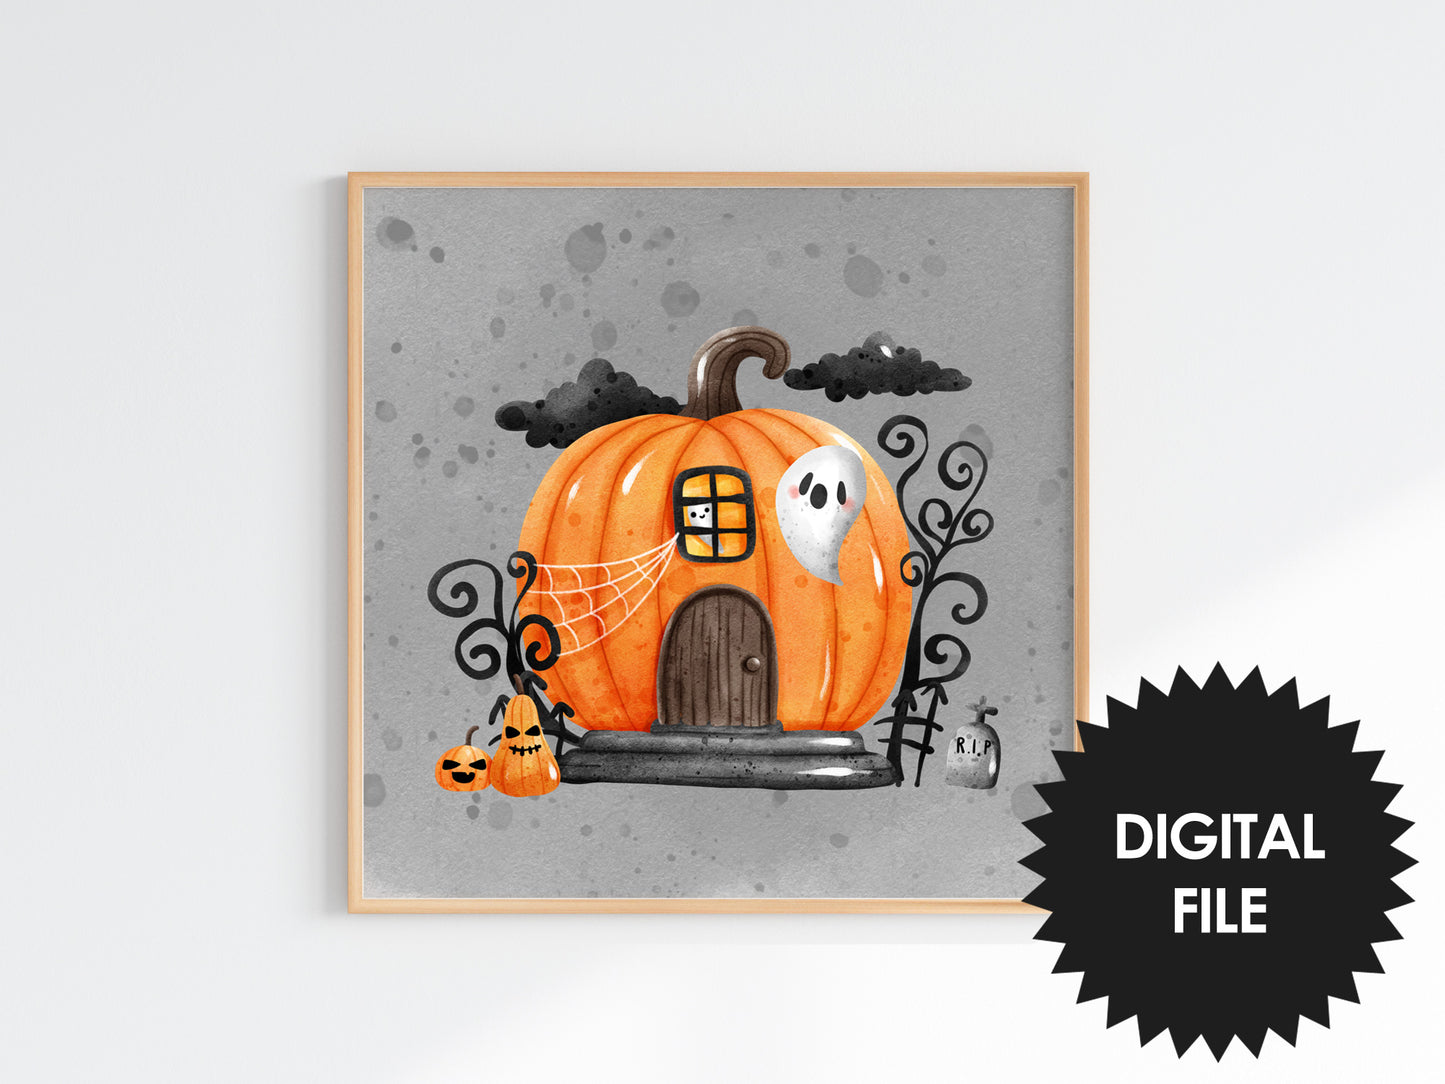 Spooky Halloween Wall Art For Kids, Set of 4 Printables, Digital Download, Print at Home, Print Any Size Up To 20x20 inch